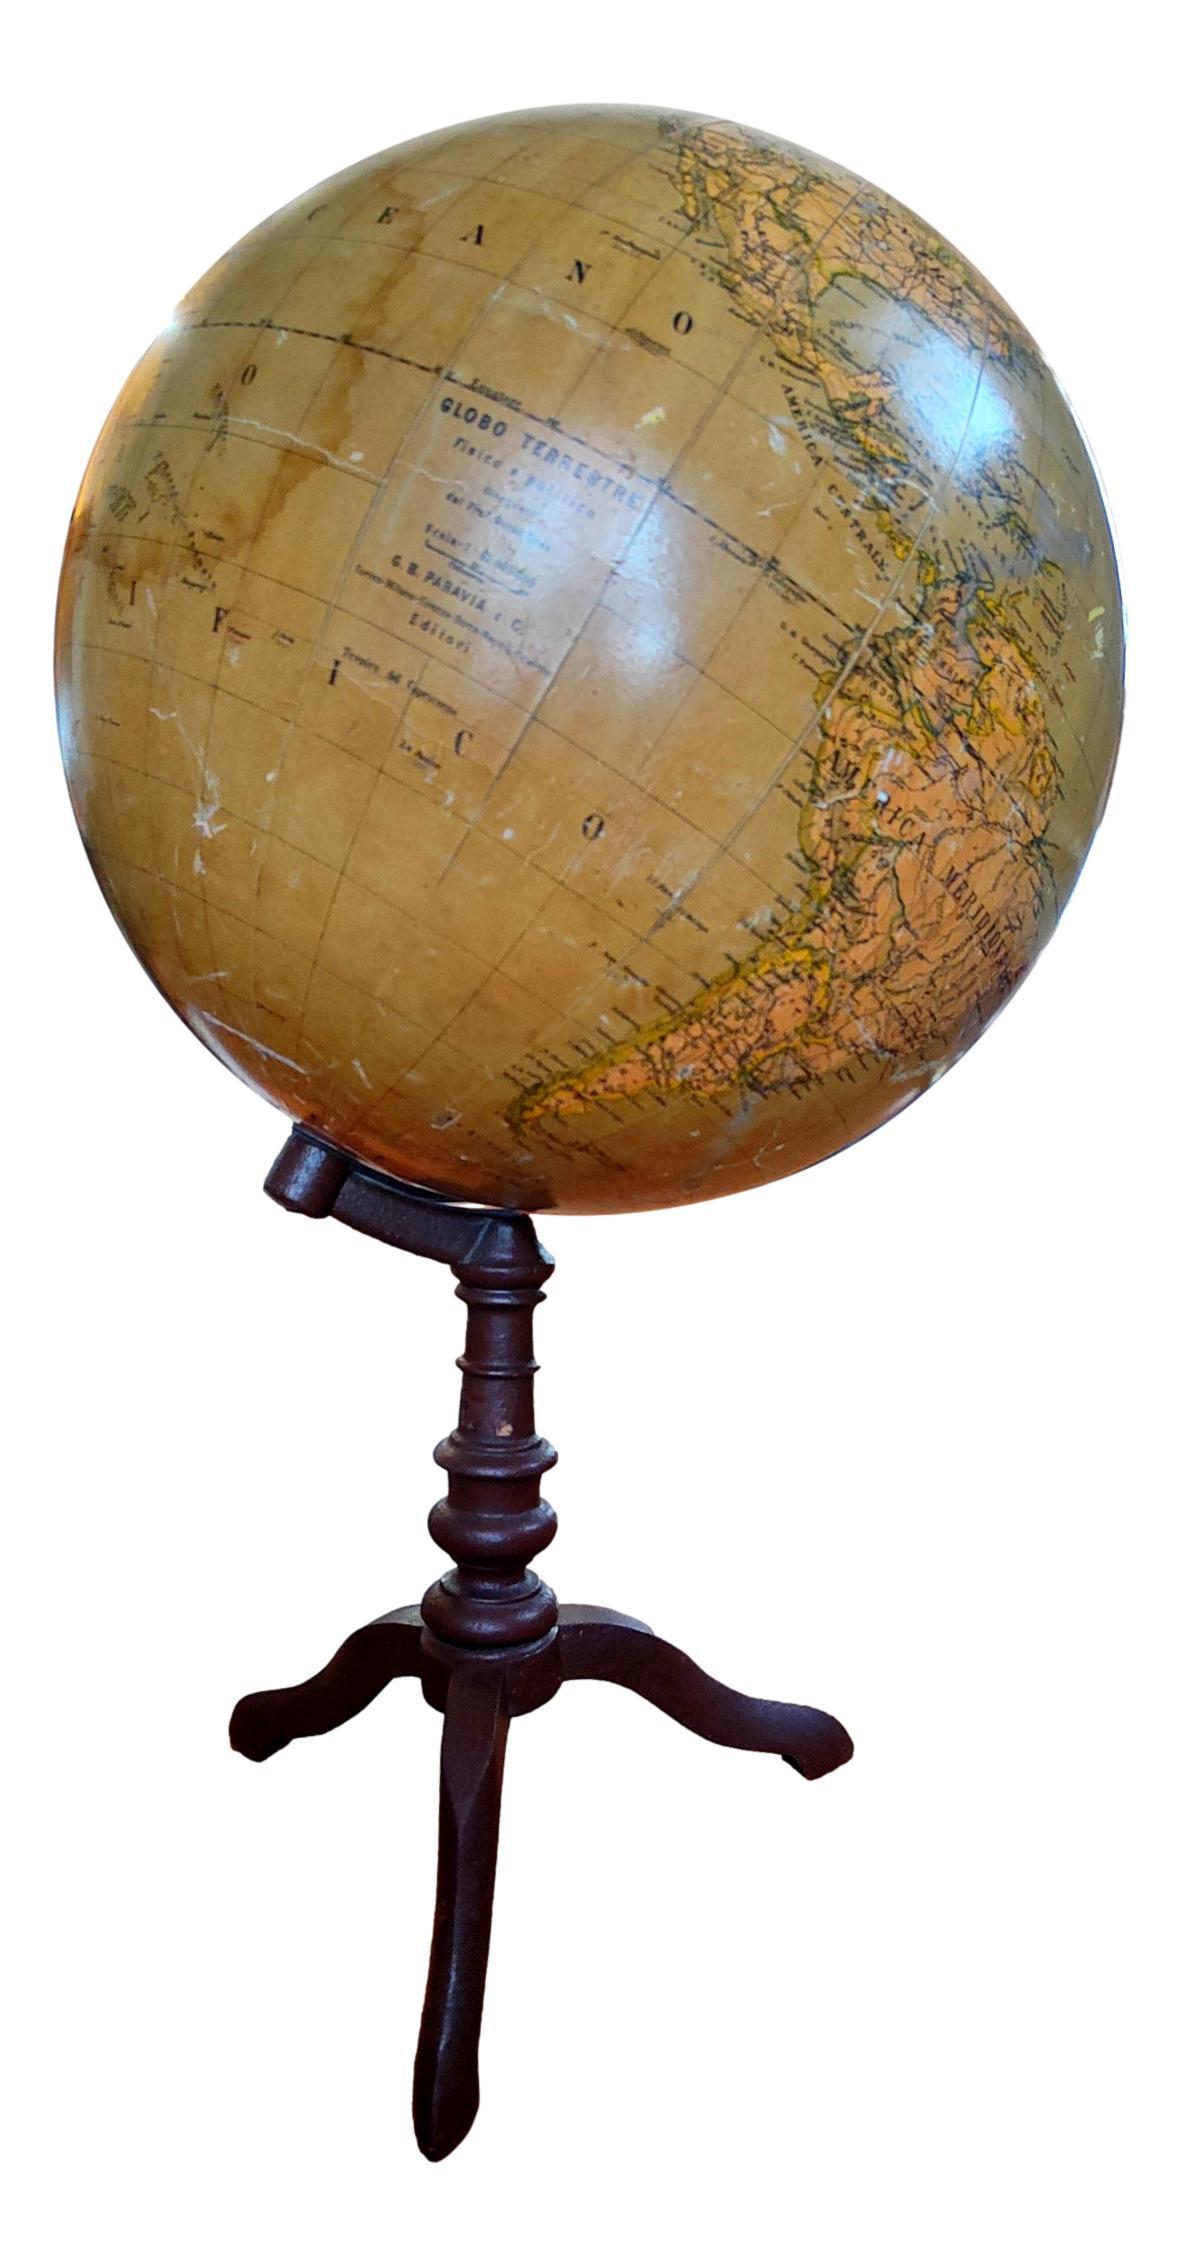 extremely rare early 20th century world map made by Paravia Italia on illustrations by Guido Cora, one of the most important illustrators ever.
Made of parchment-coated material, cast iron base with three feet.
It measures 56 cm in height by a